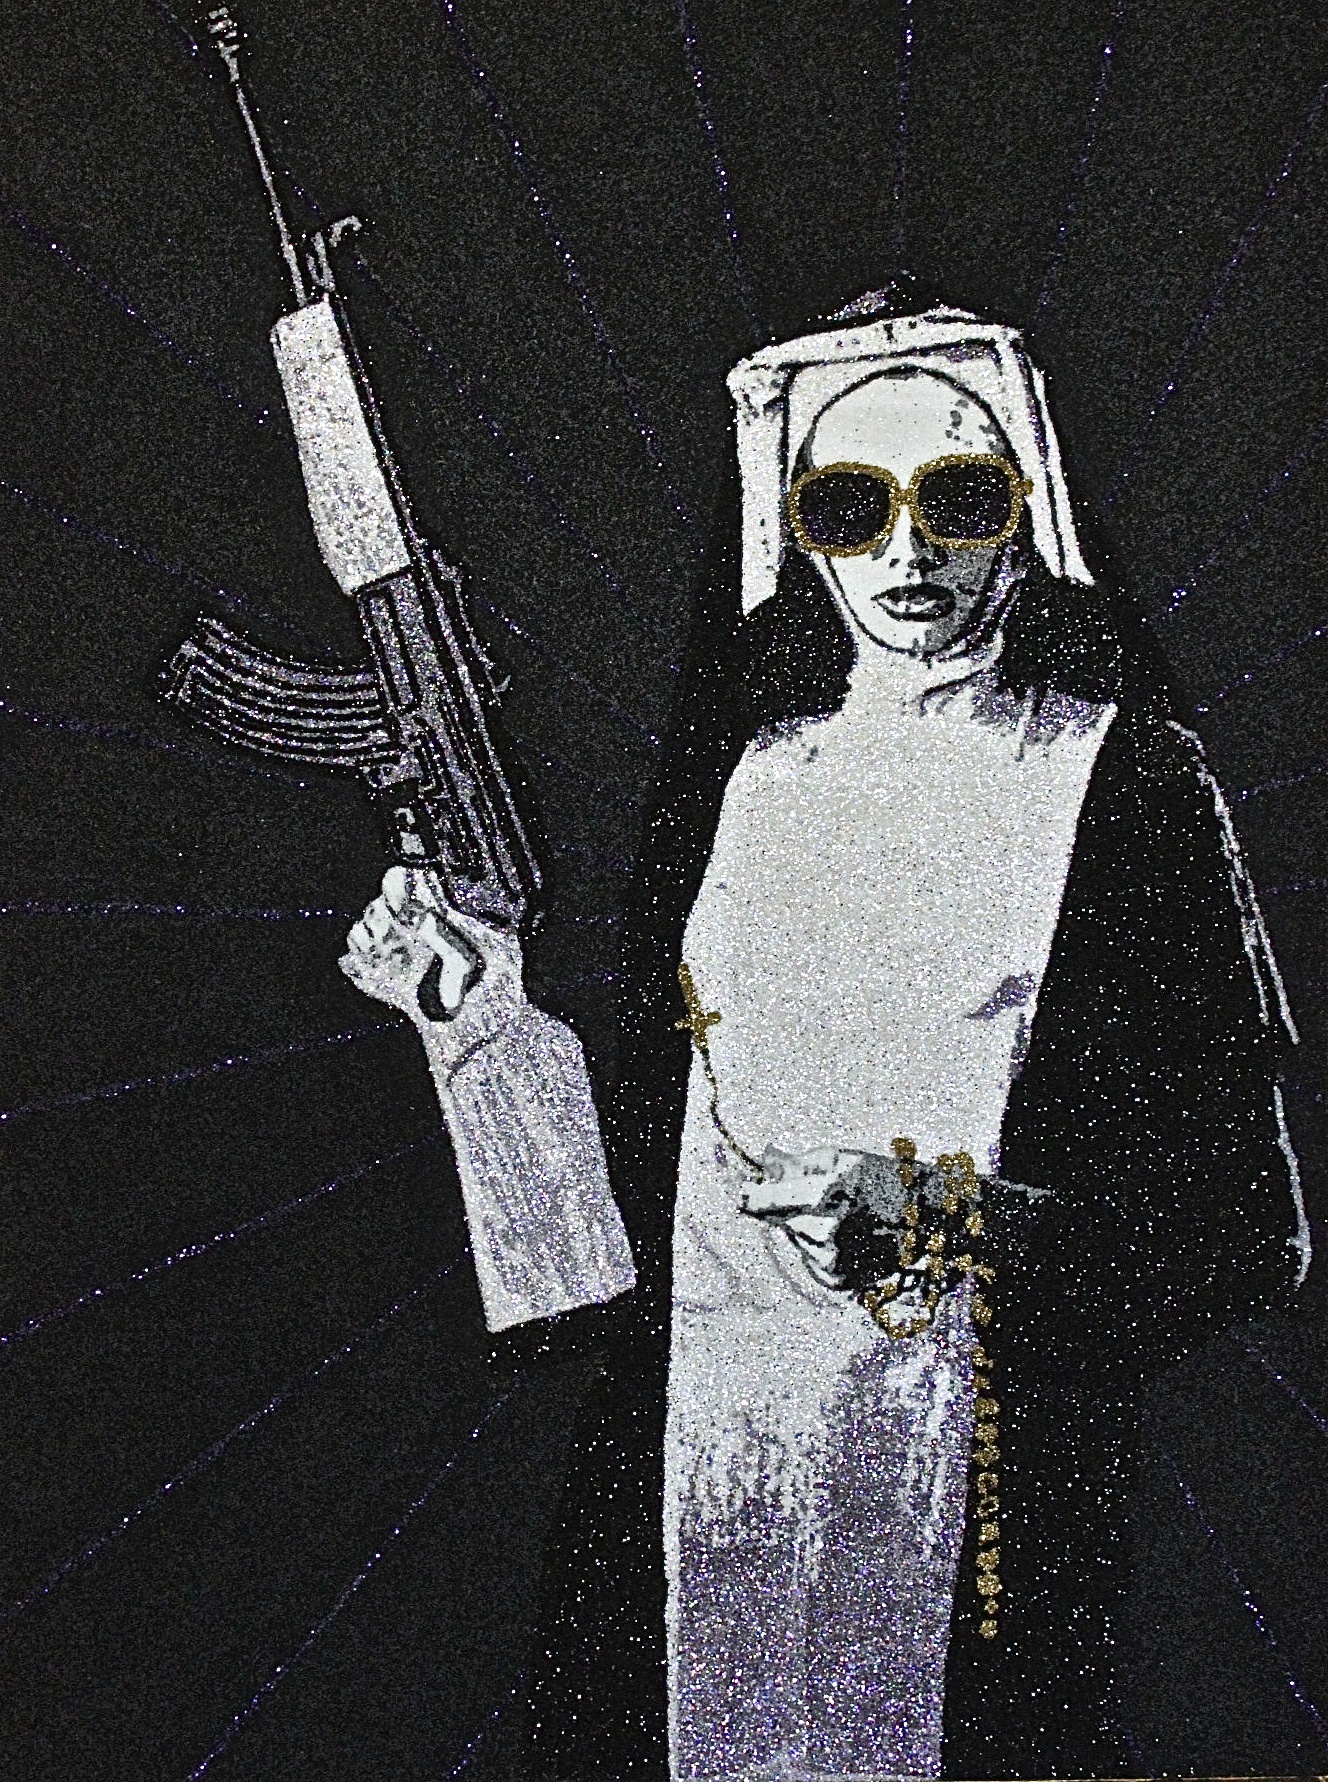  Nun With A Gun #1  glitter on plywood  36'' x 48''  SOLD   CONTACT FOR MORE INFO  